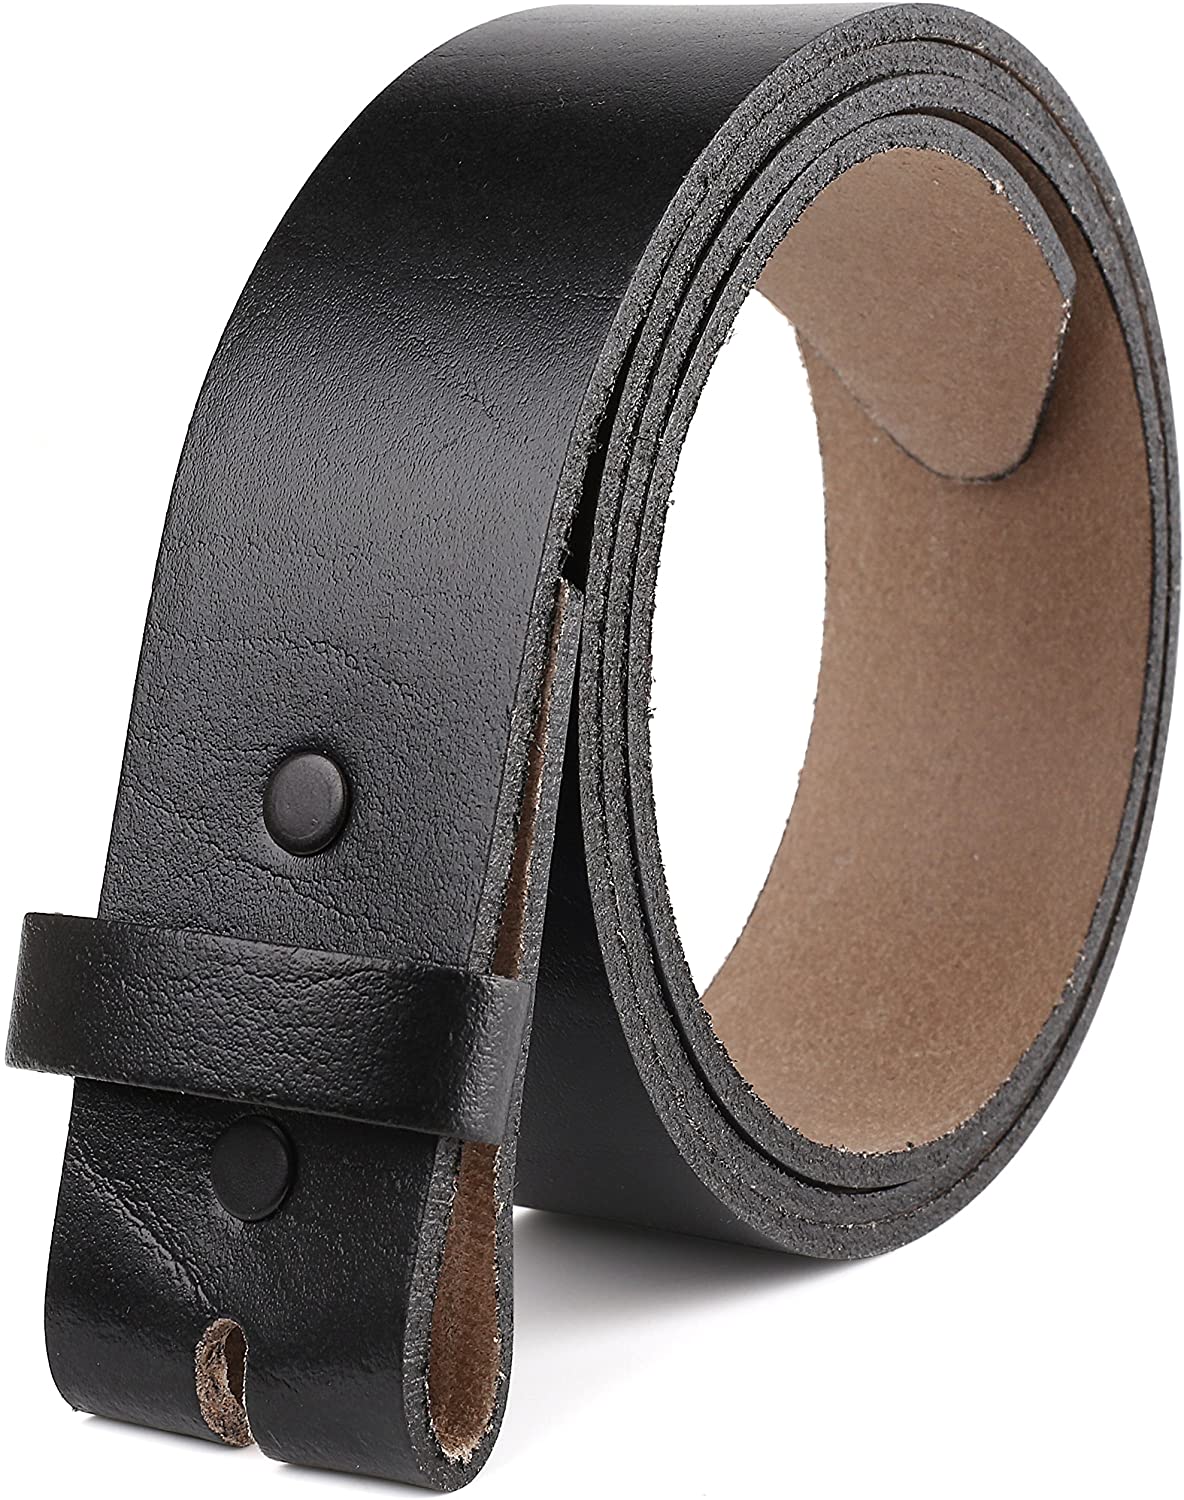 Belt for buckle men Snap on Strap top Grain One Piece Leather no, Black ...